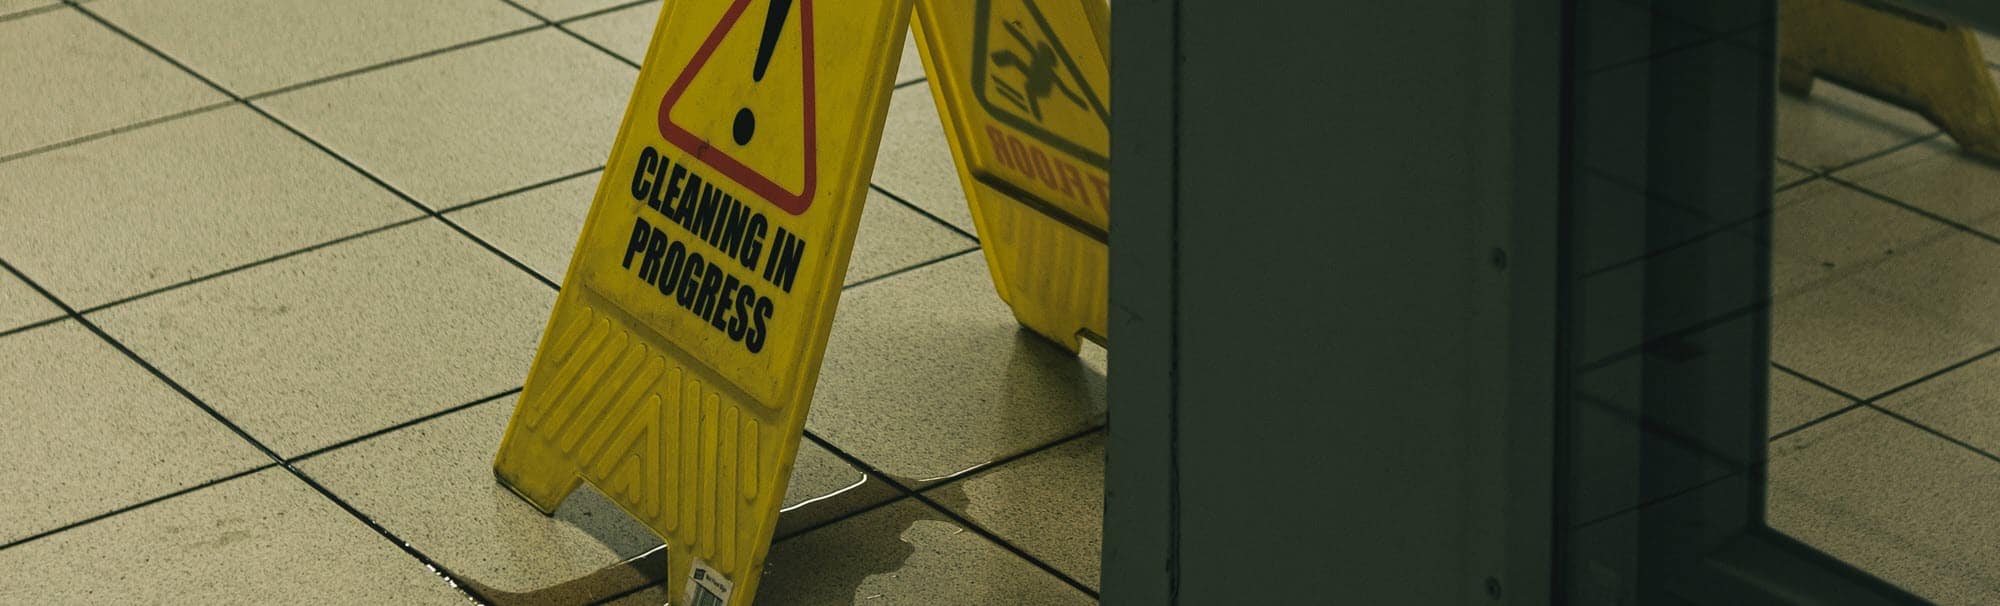 photo of wet floor with caution sign